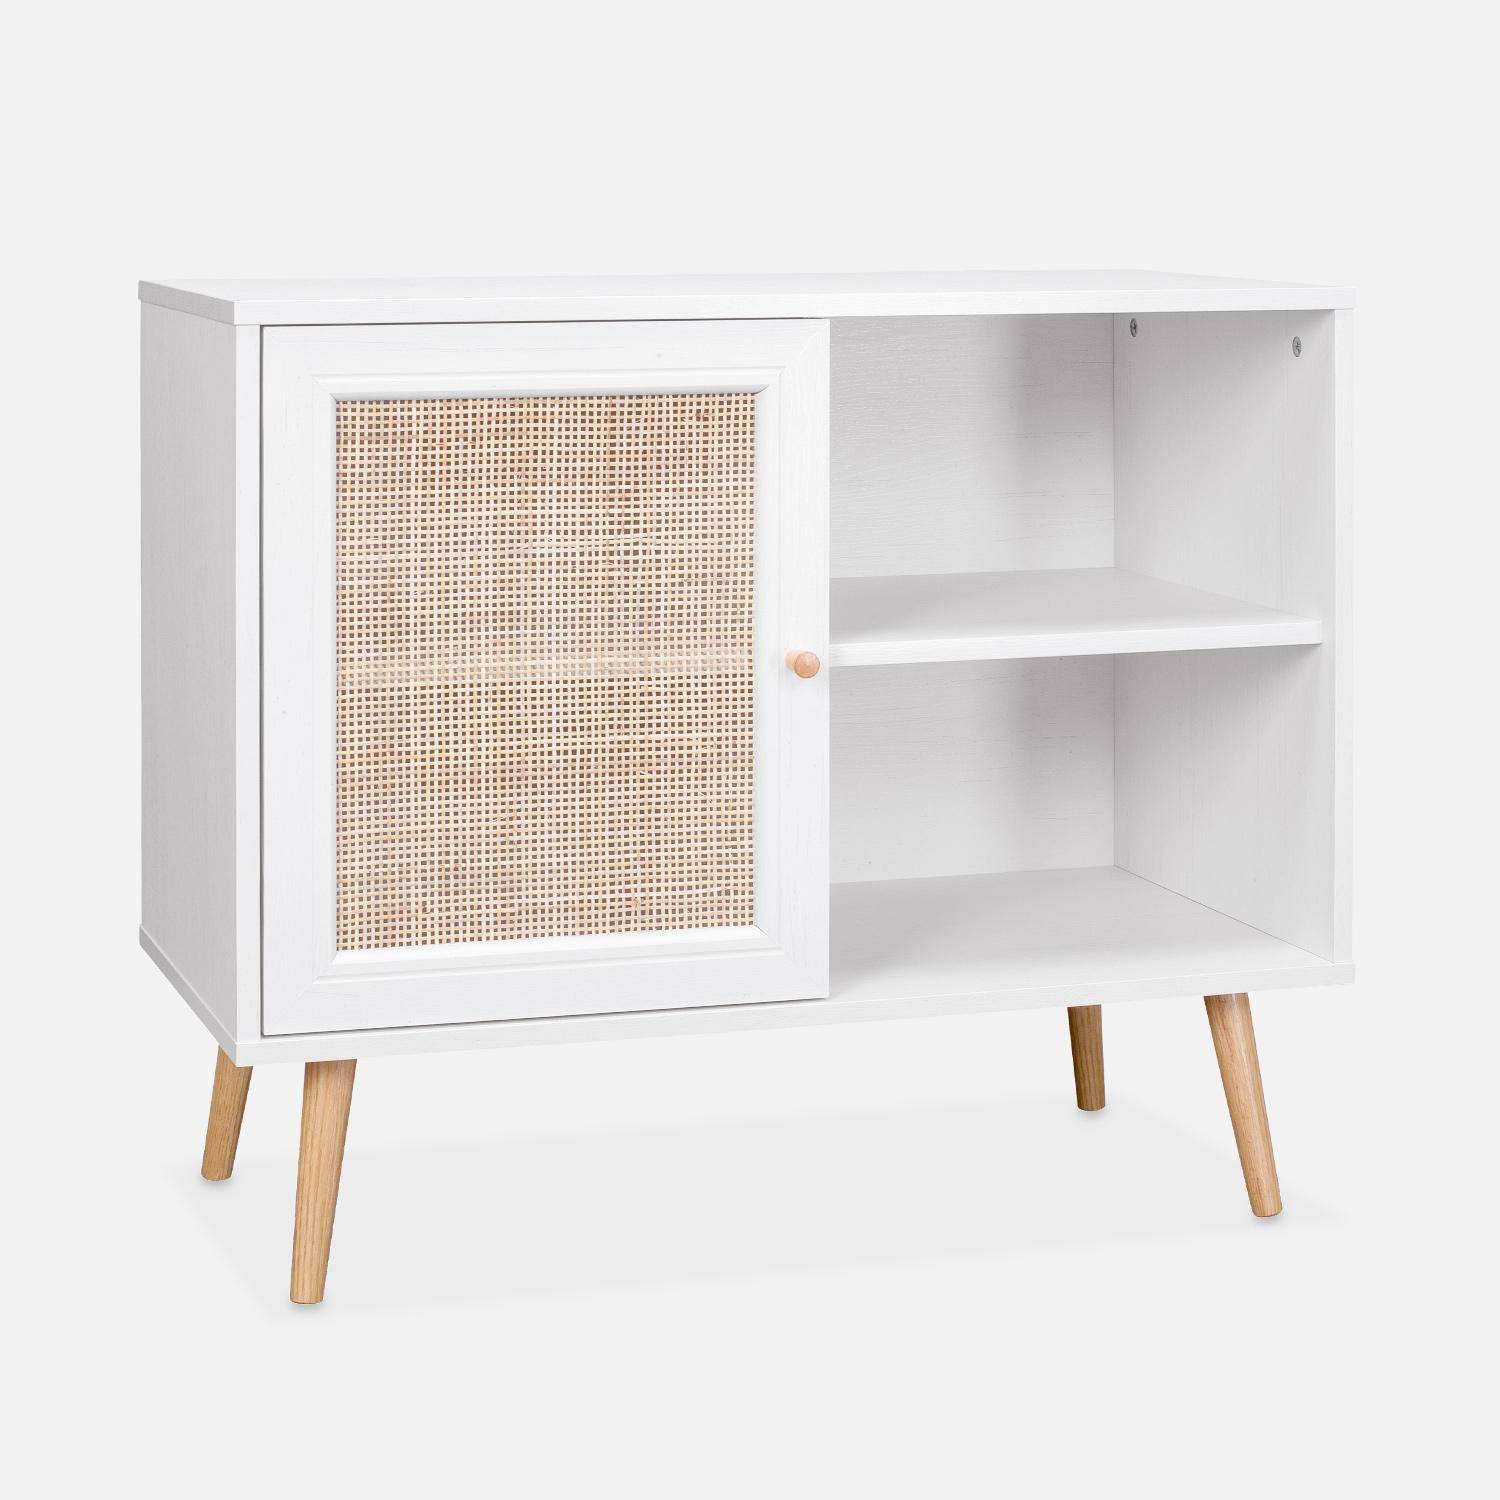 Wooden and cane rattan detail storage cabinet with 2 shelves, 1 cupboard, Scandi-style legs, 80x39x65.8cm - Boheme - White Photo2